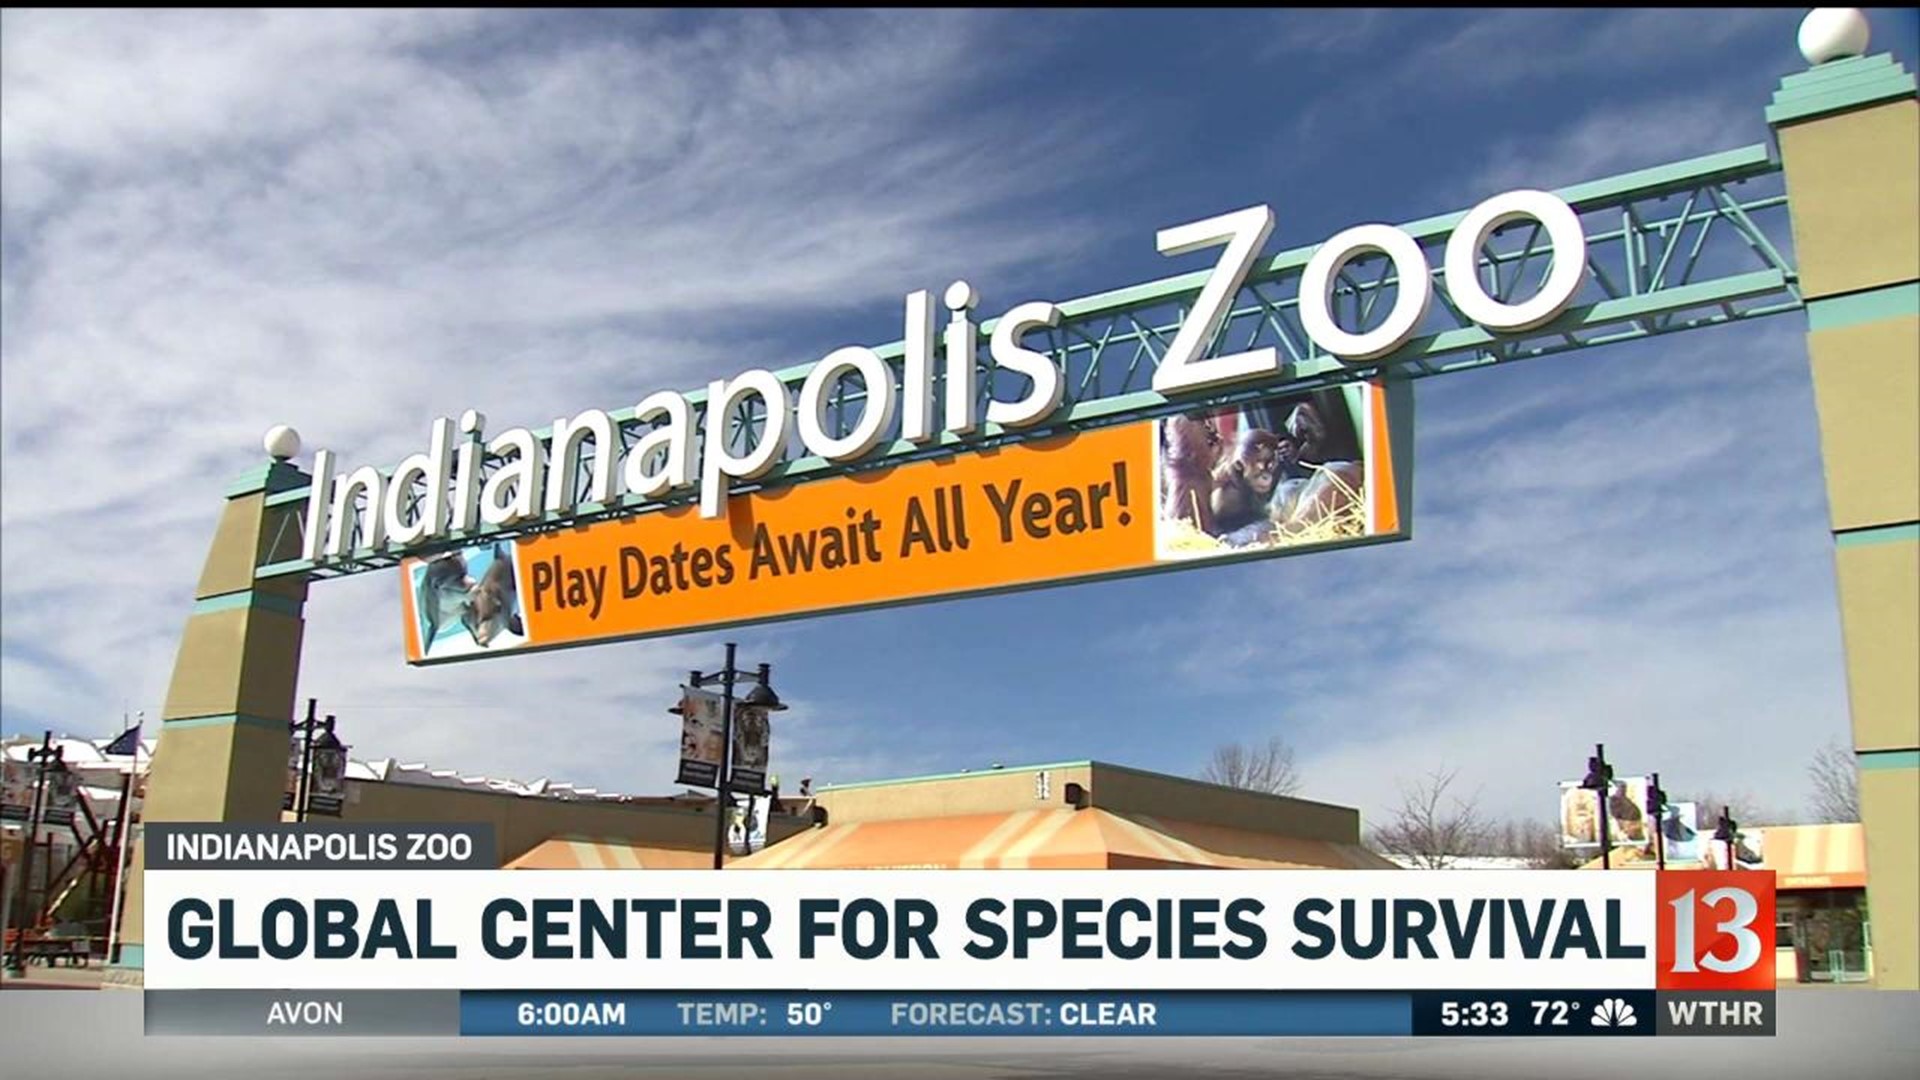 Indianapolis Zoo will be home to first Global Center for Species